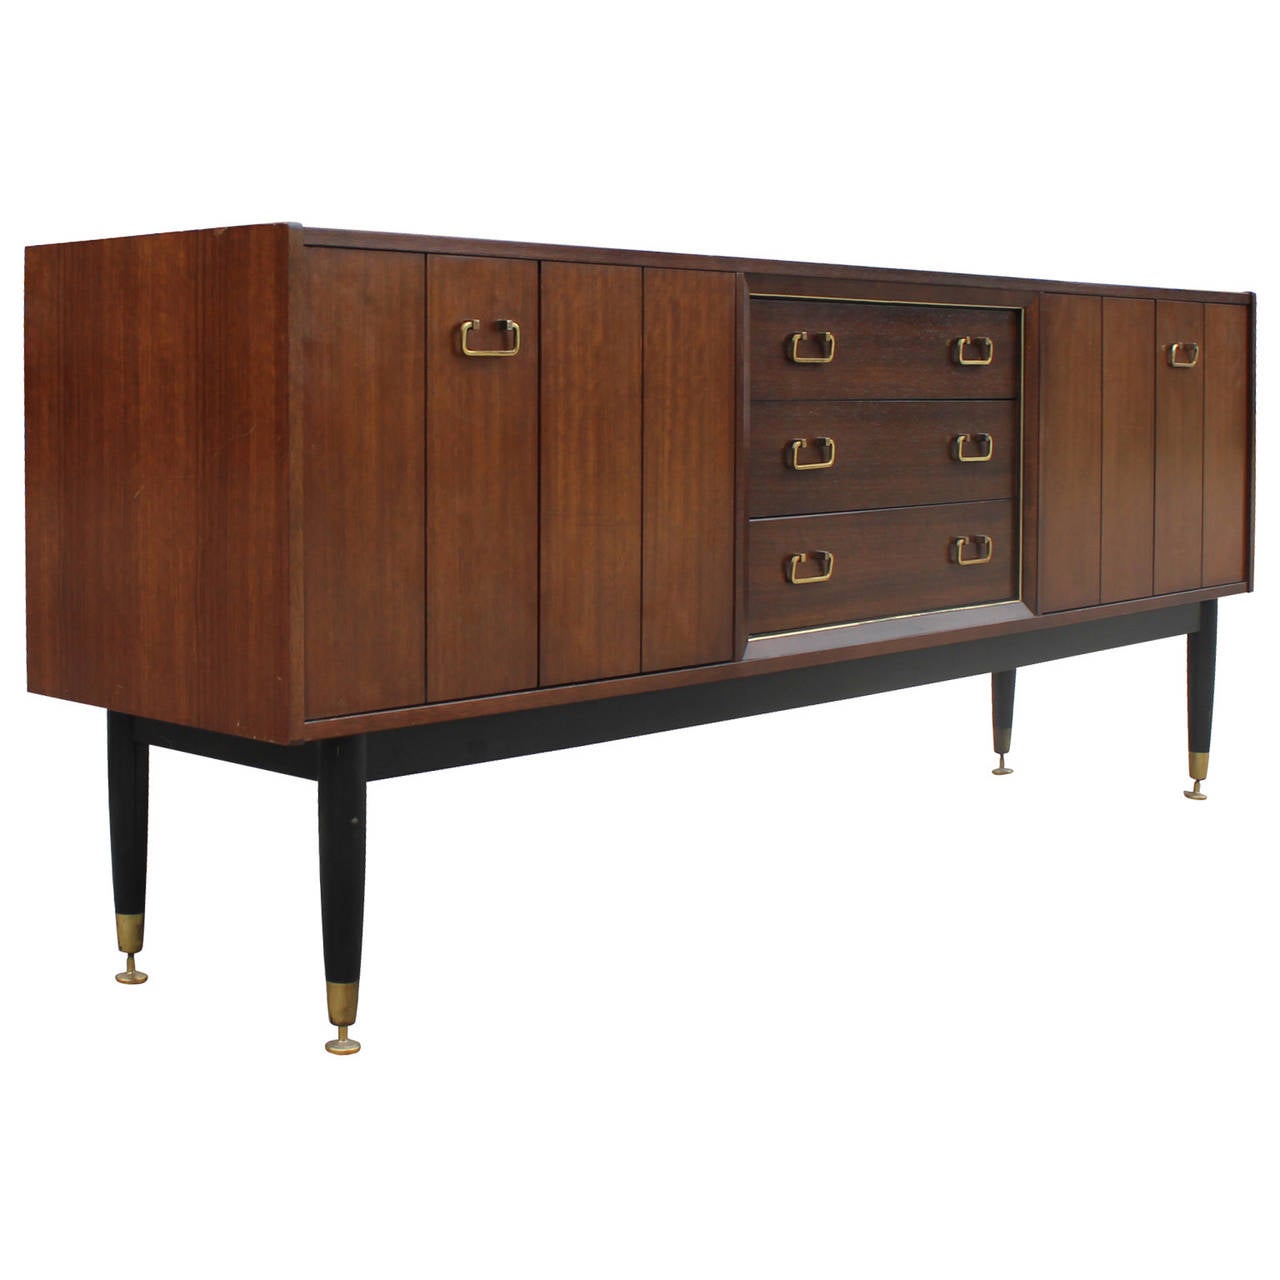 Stunning walnut sideboard or credenza with brass handles and folding doors. Case rests upon a black lacquered base. In great vintage condition. Can be made perfect at an additional cost. Excellent piece of furniture.